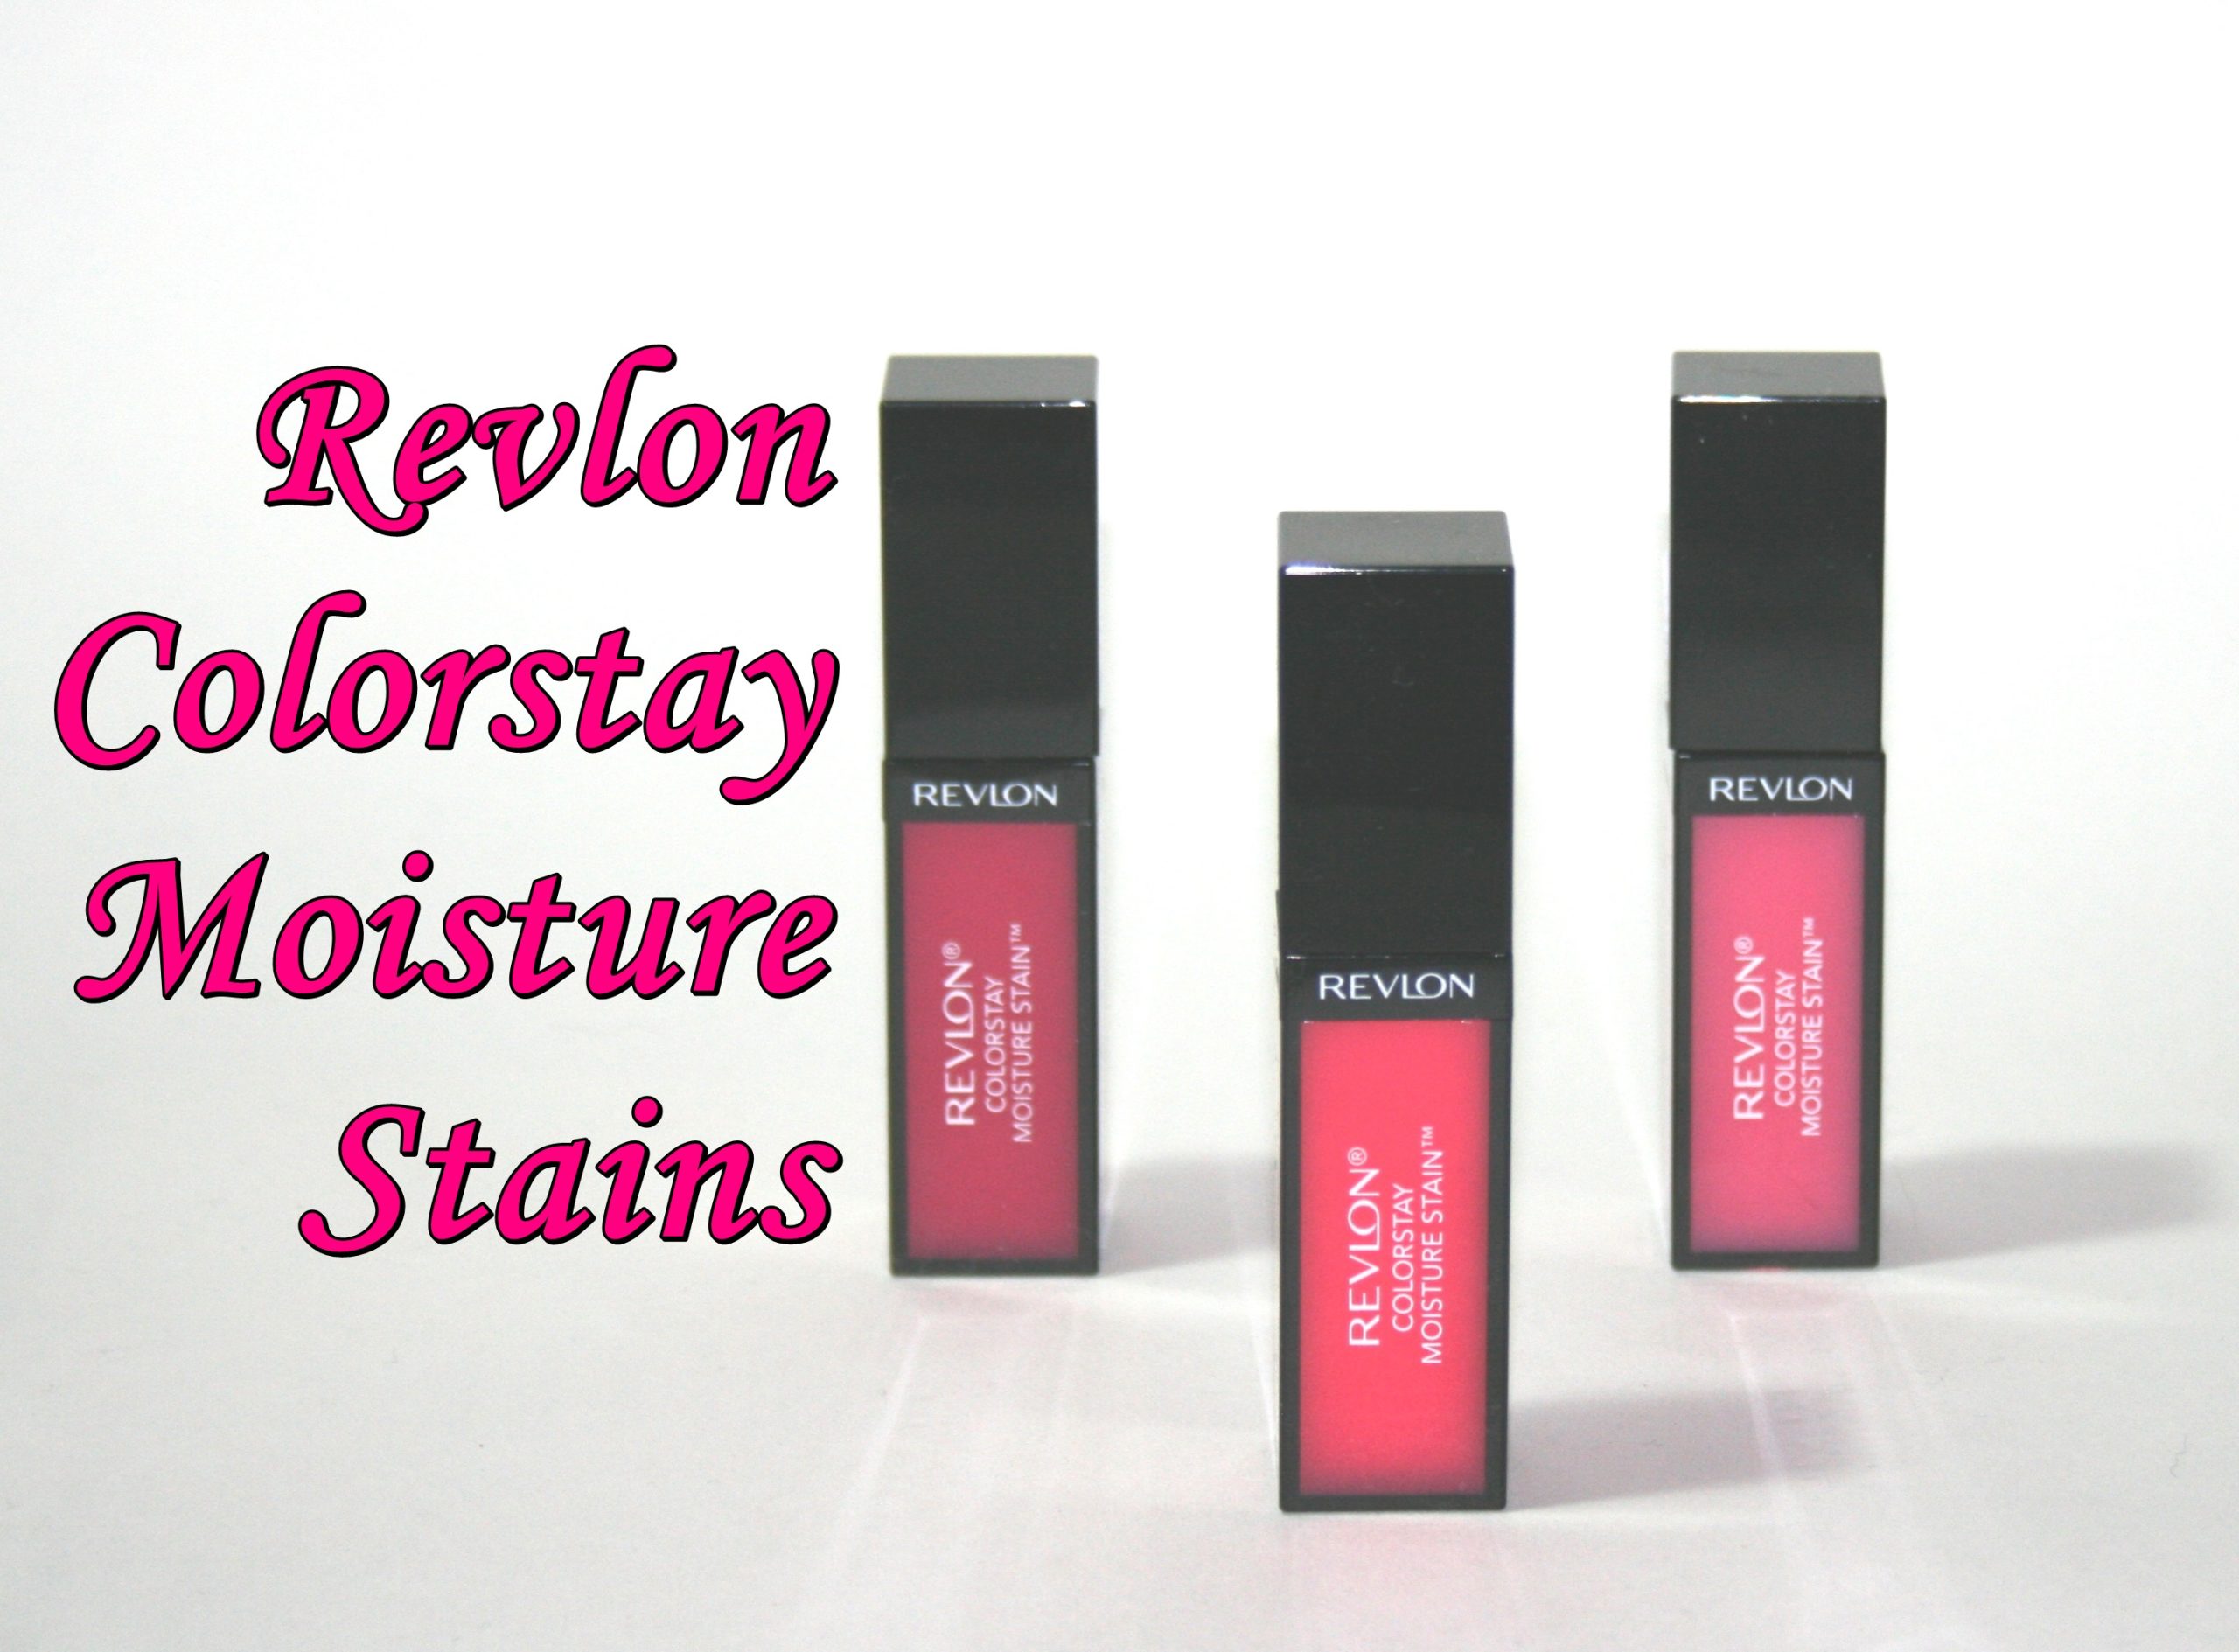 Revlon Colorstay Moisture Stains in LA Exclusive, Rio Rush and India Intrigue